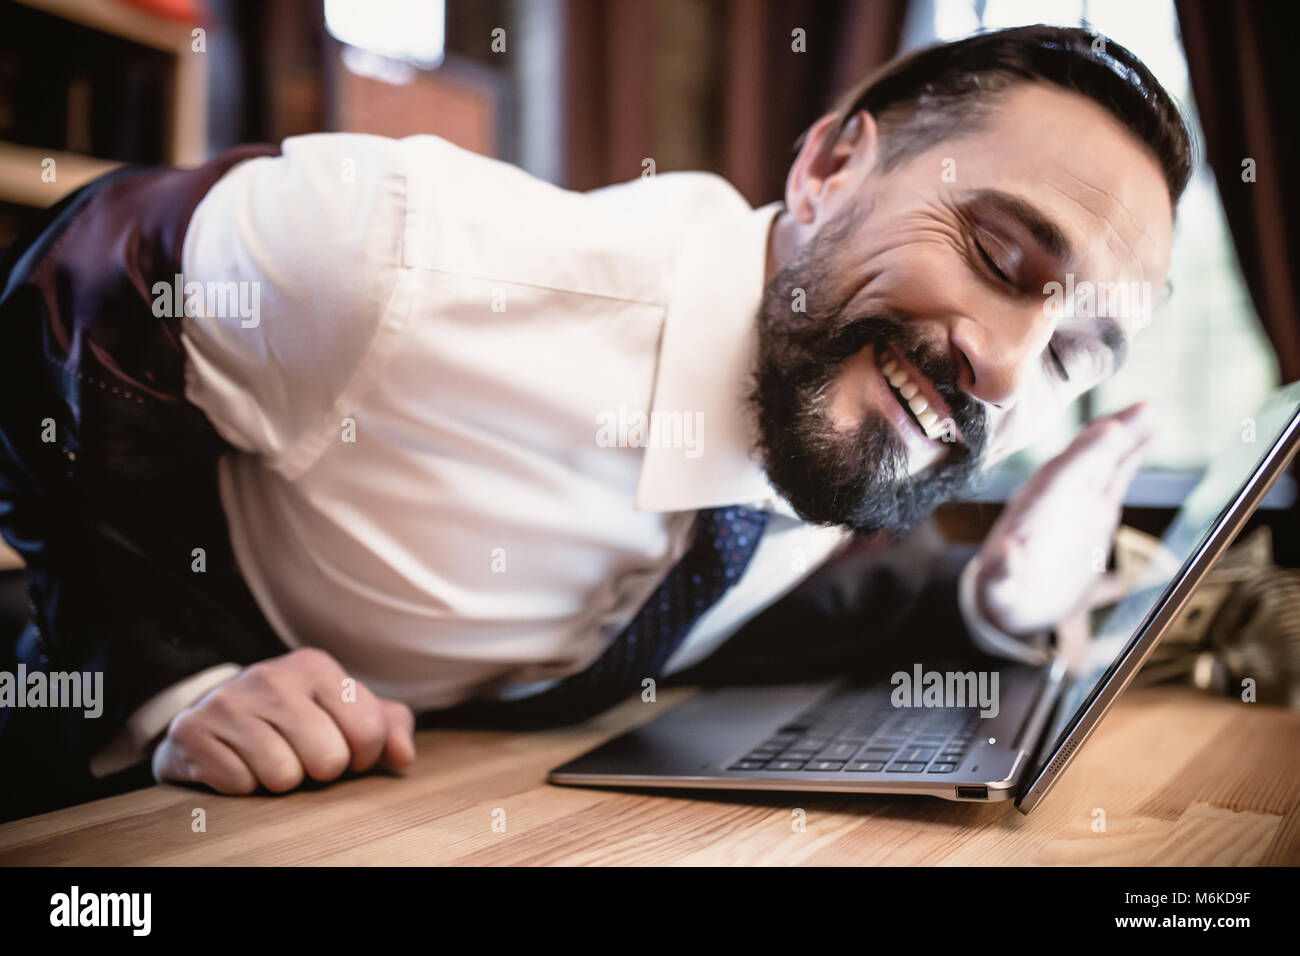 businessman in a strange position Stock Photo